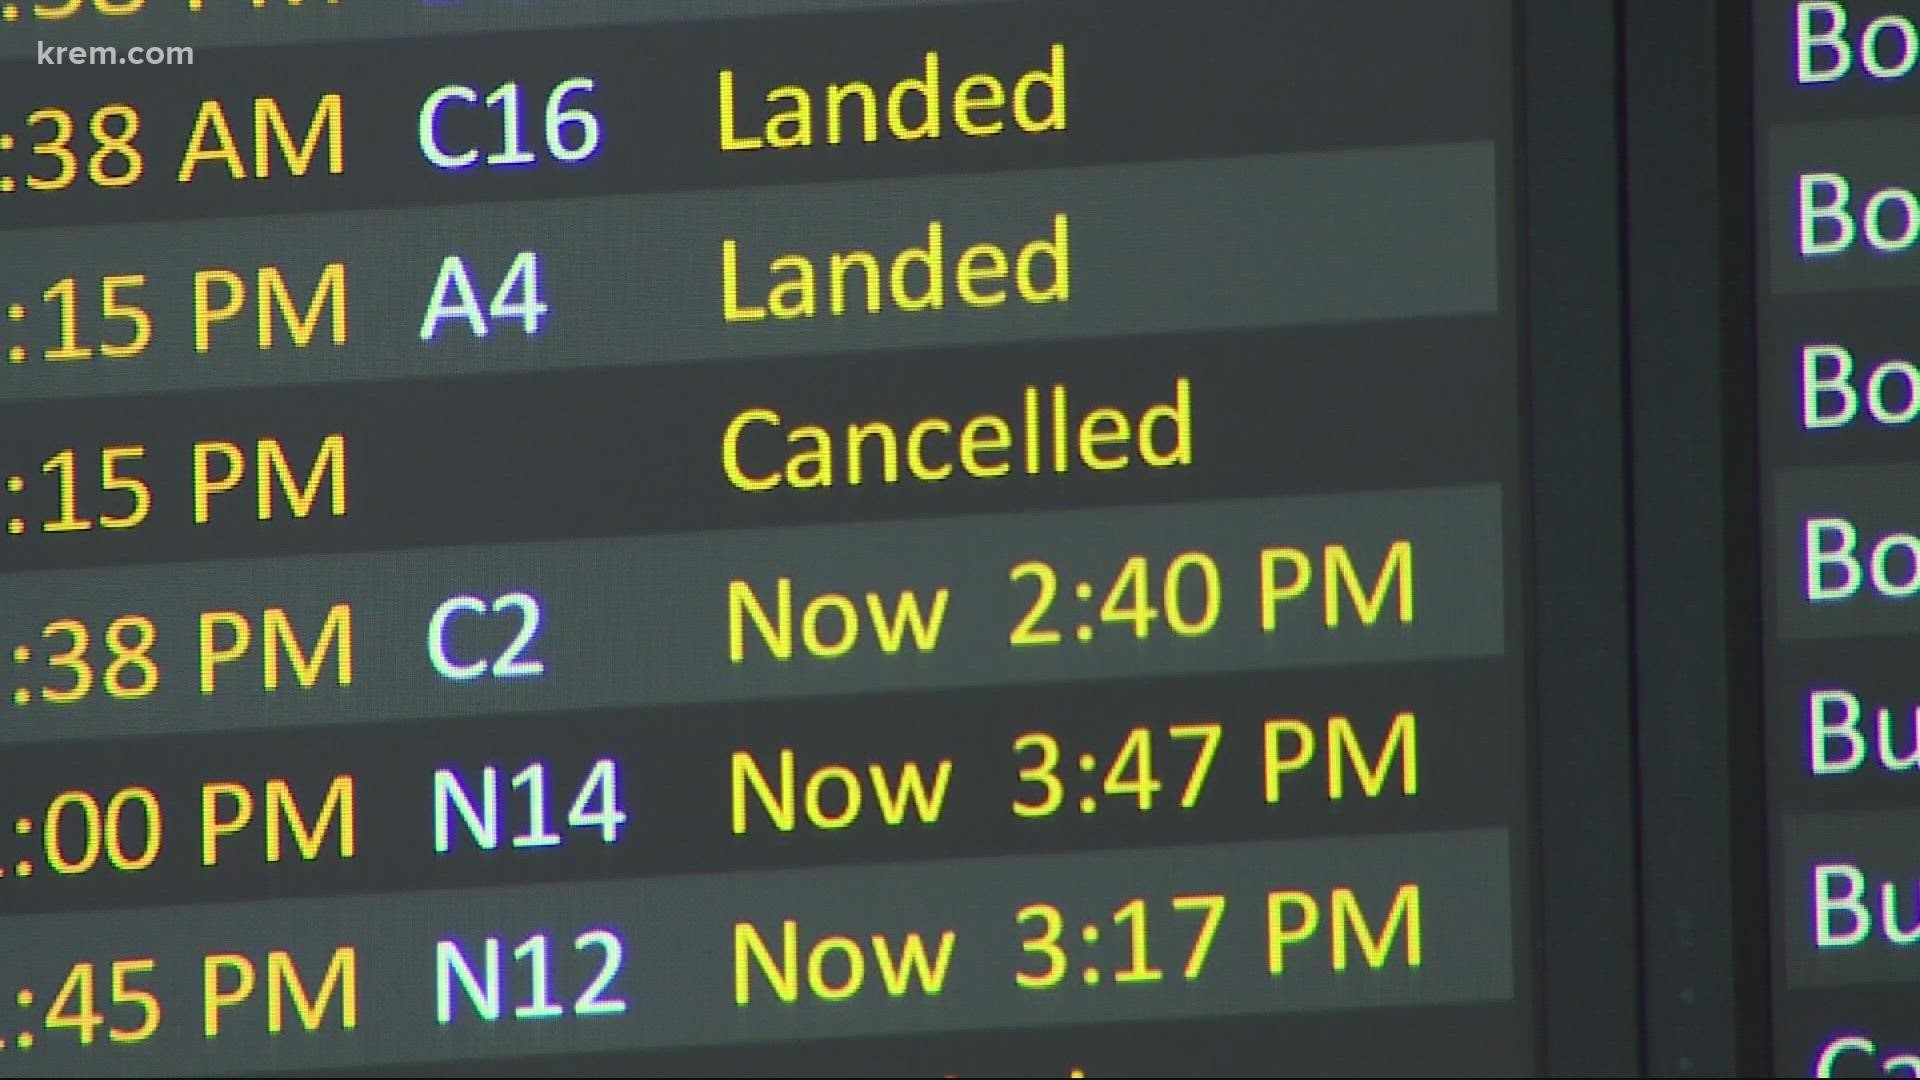 Alaska canceled 170 flights across its network Wednesday, with more cancellations and delays expected through the week.